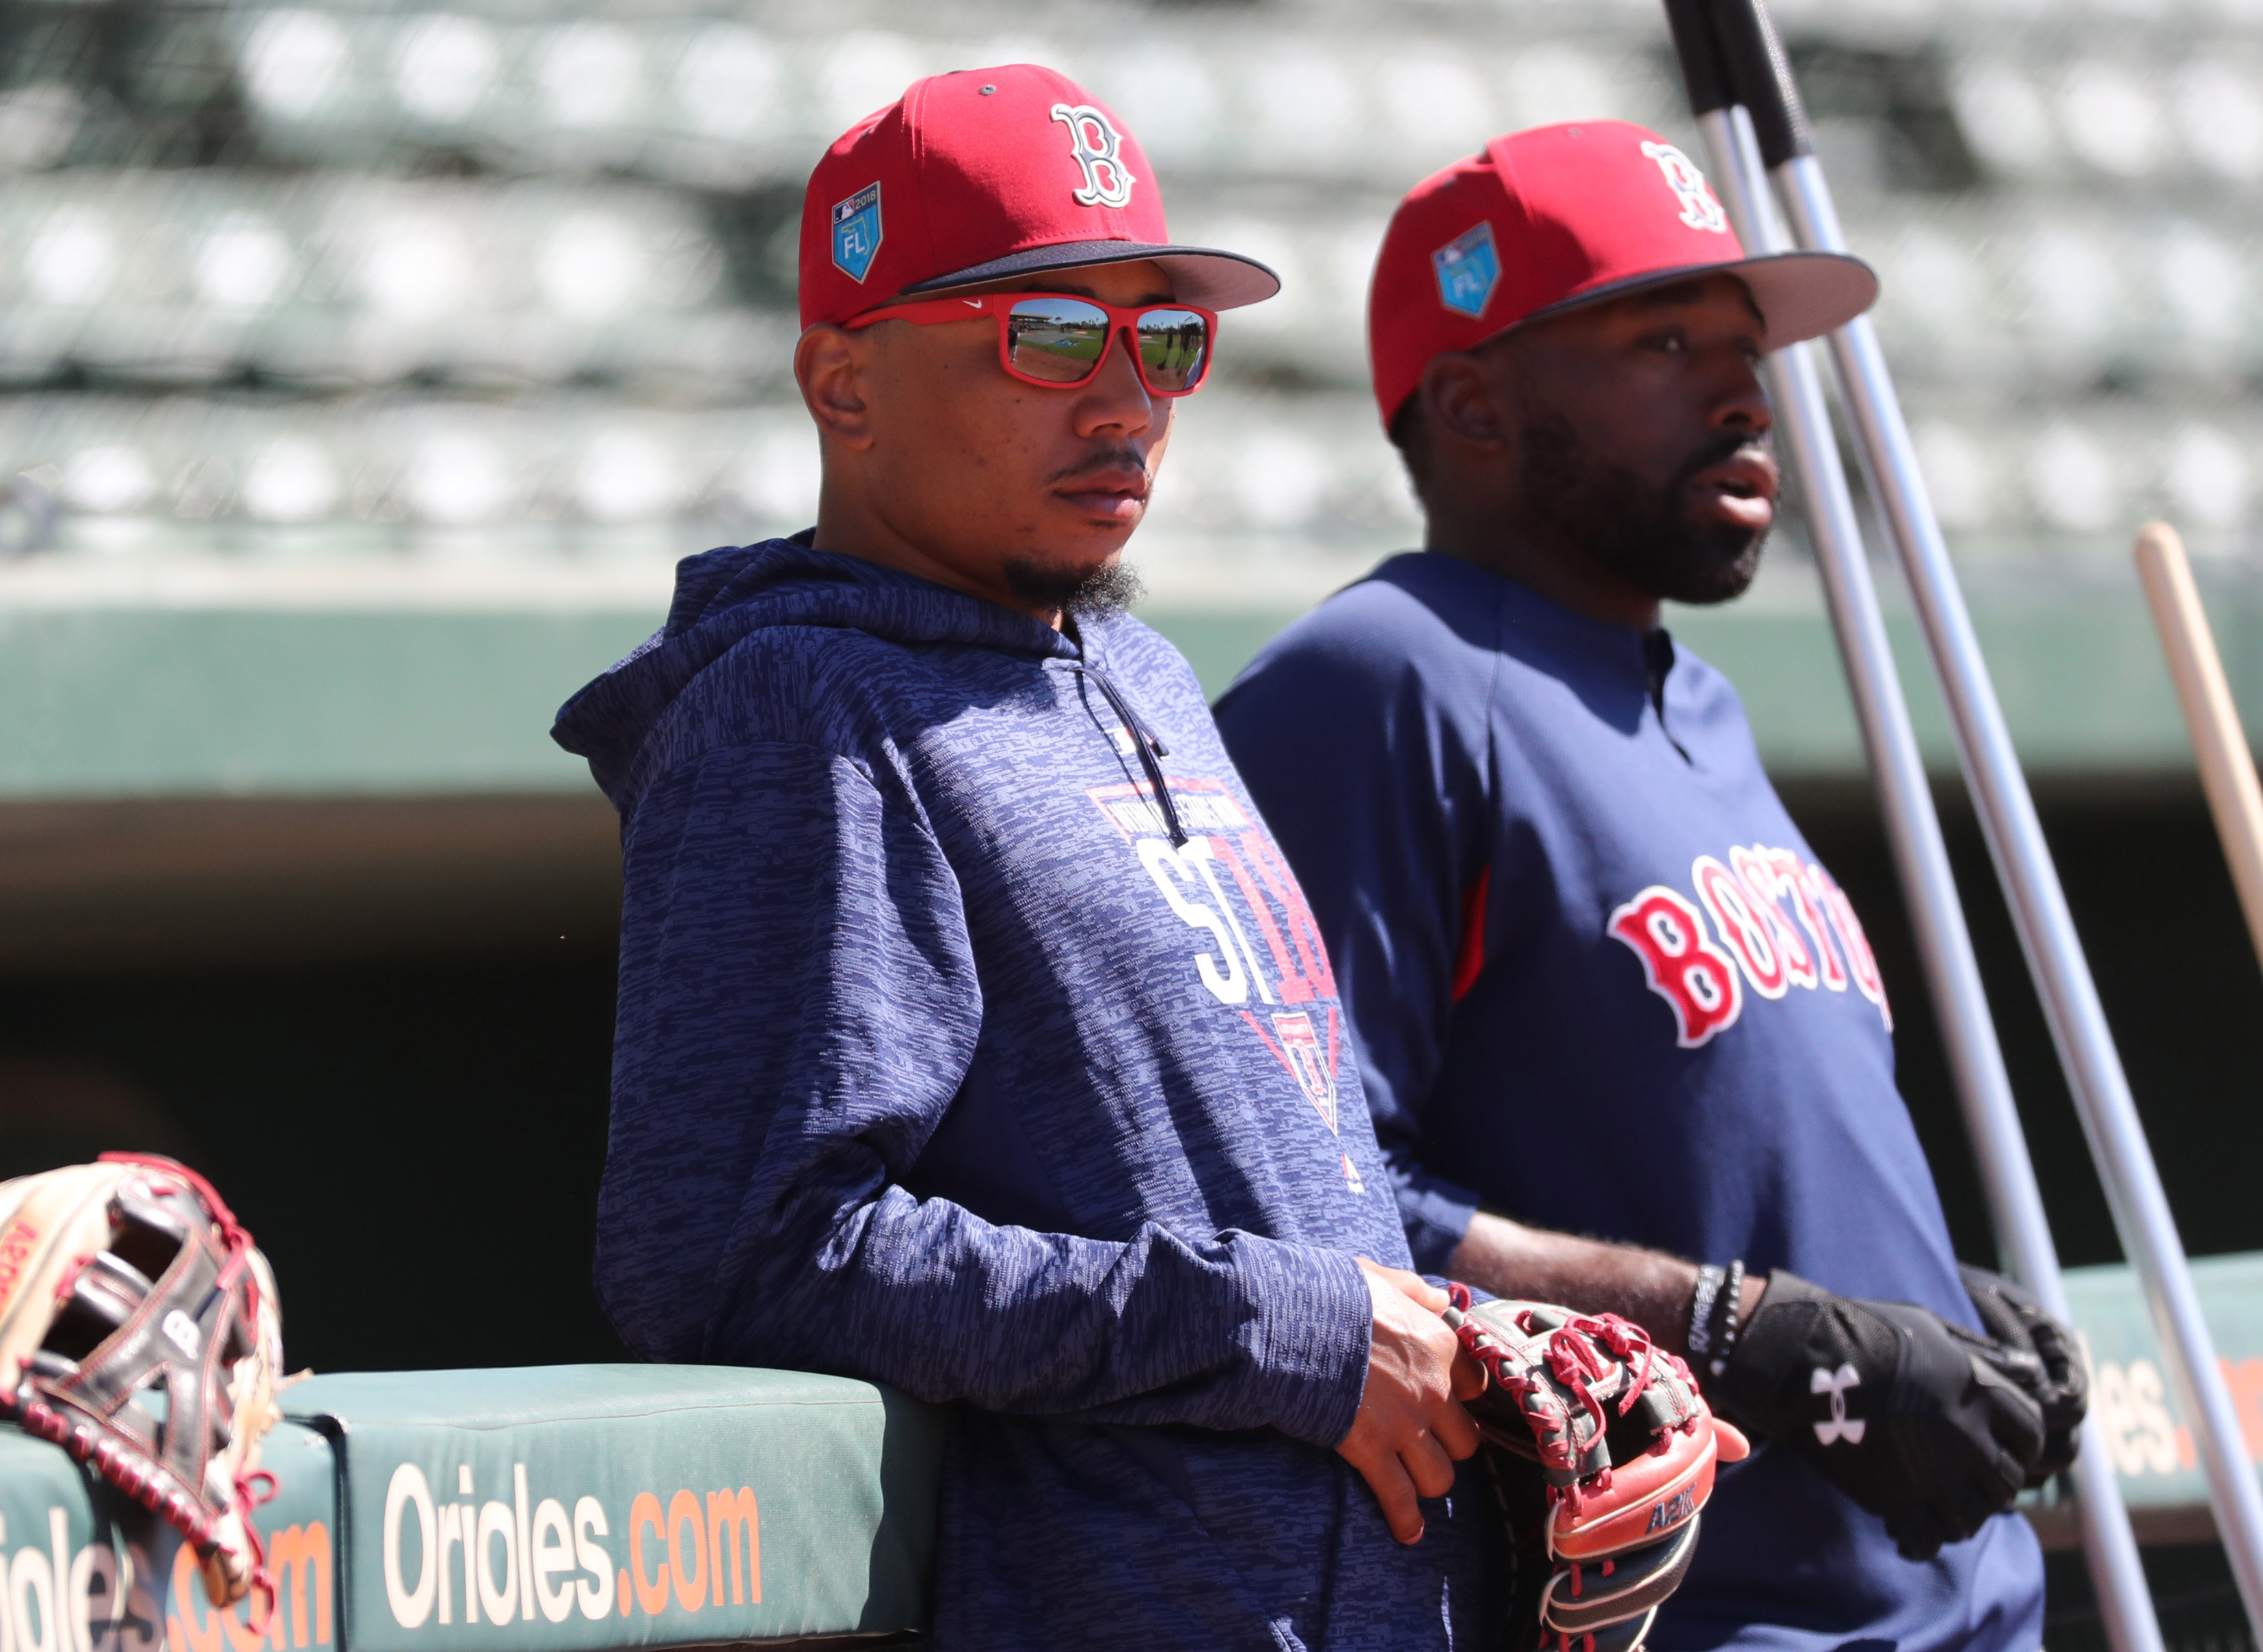 Mookie Betts Isn't Done Being Baseball's Best Player